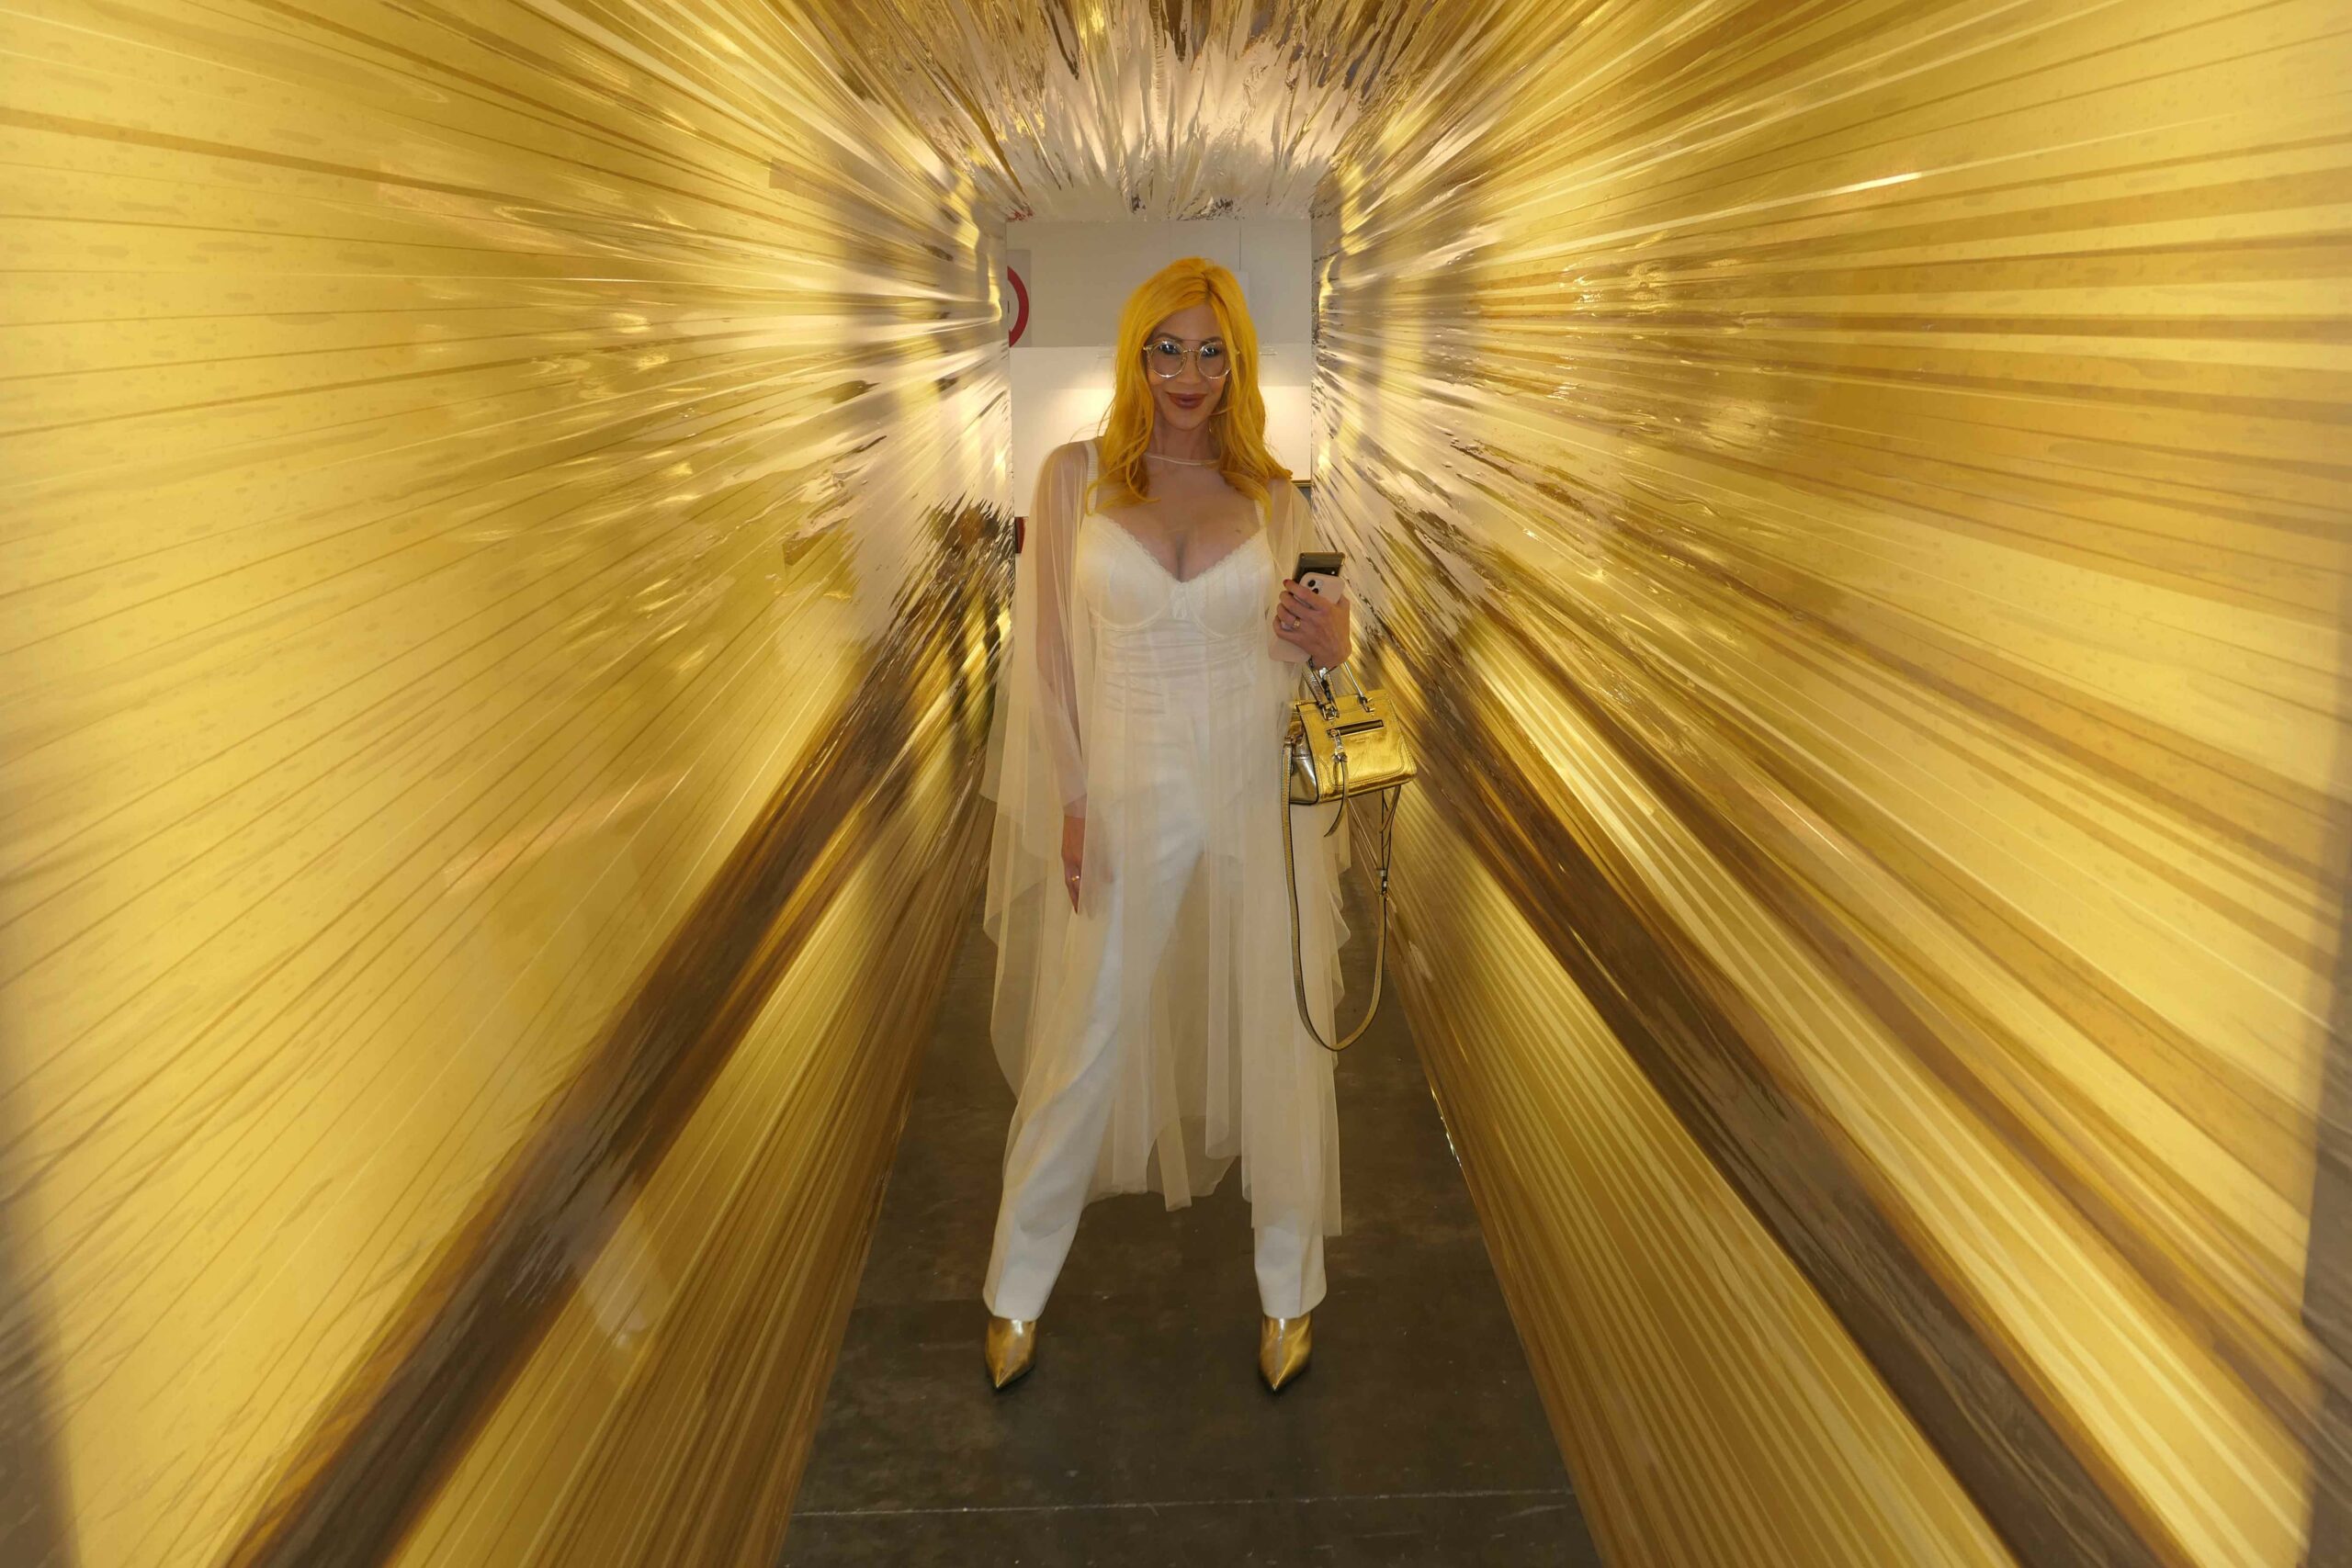 A blonde woman smiles at the camera while standing inside a golden sculpture